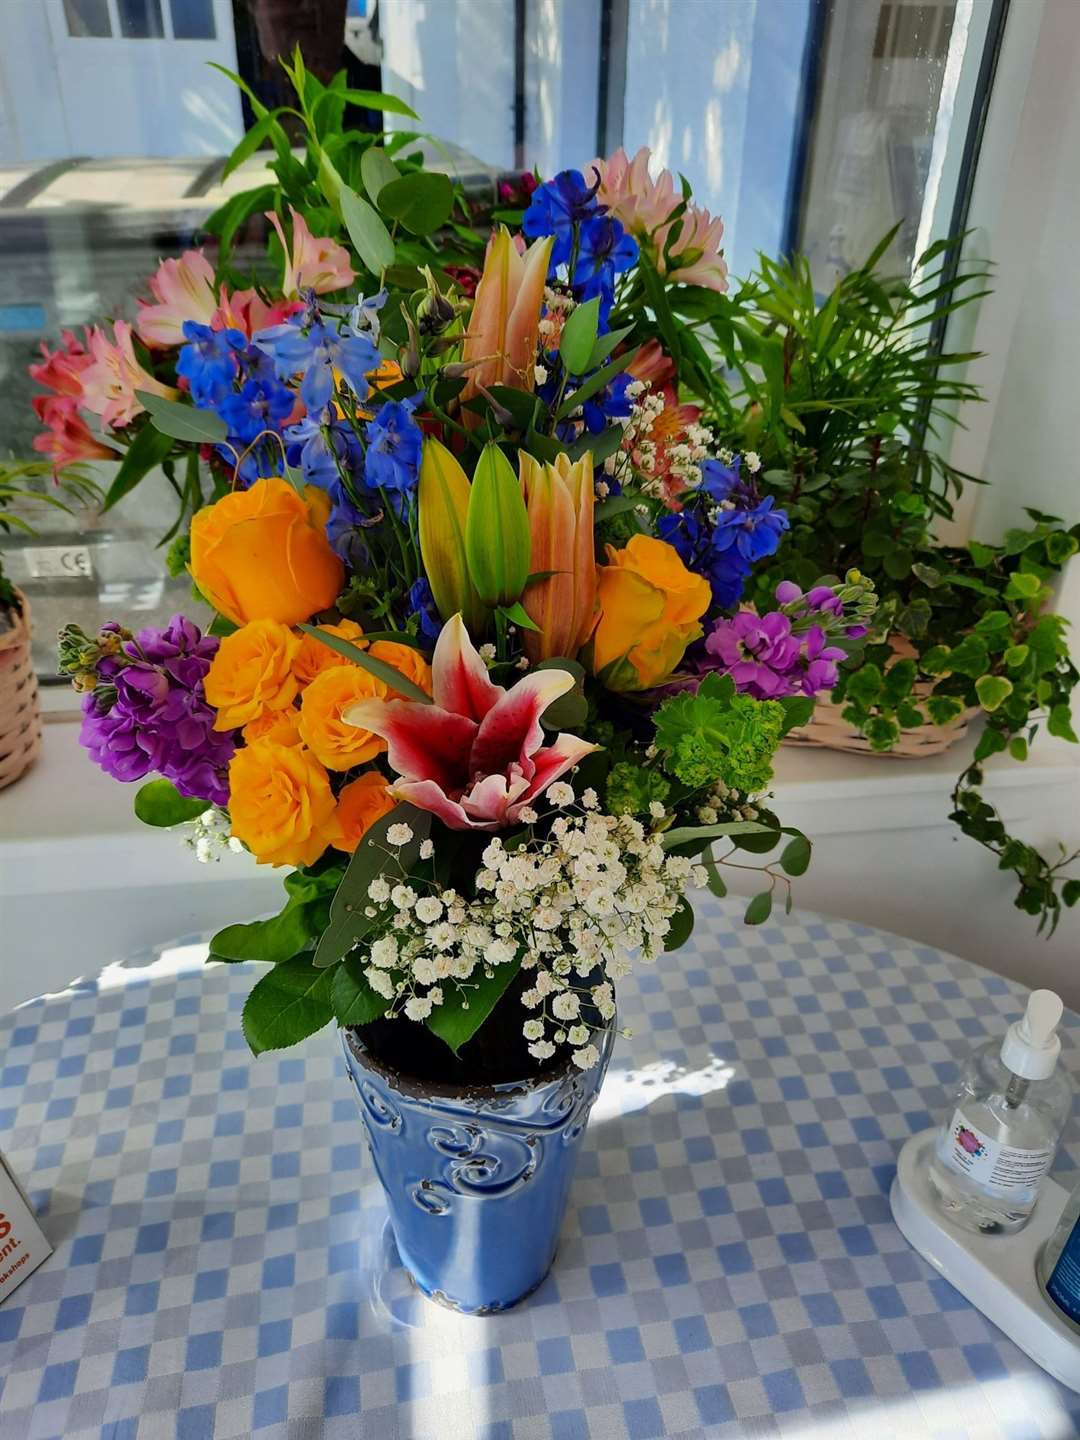 Flowers welcomed people to the birthday event. Picture: Ullapool Bookshop